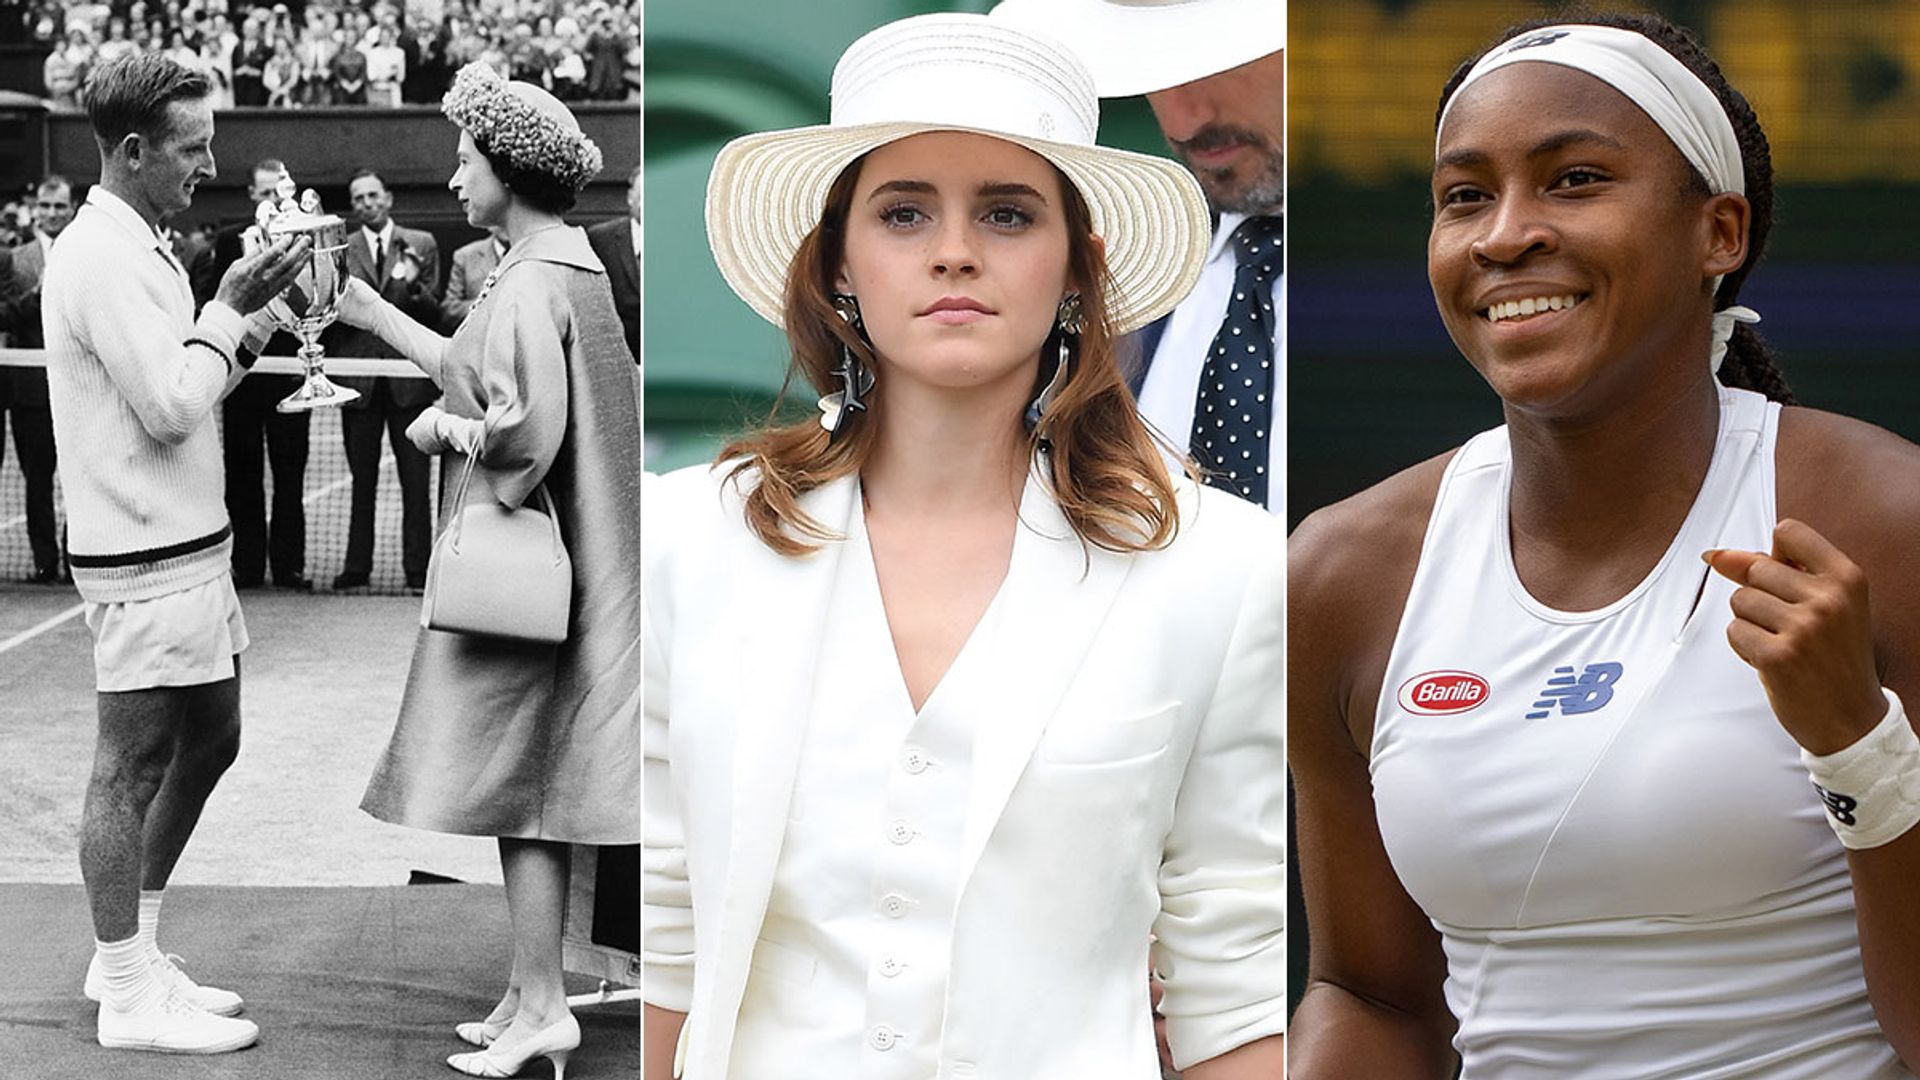 The Queen, Emma Watson and Coco Gauff at Wimbledon